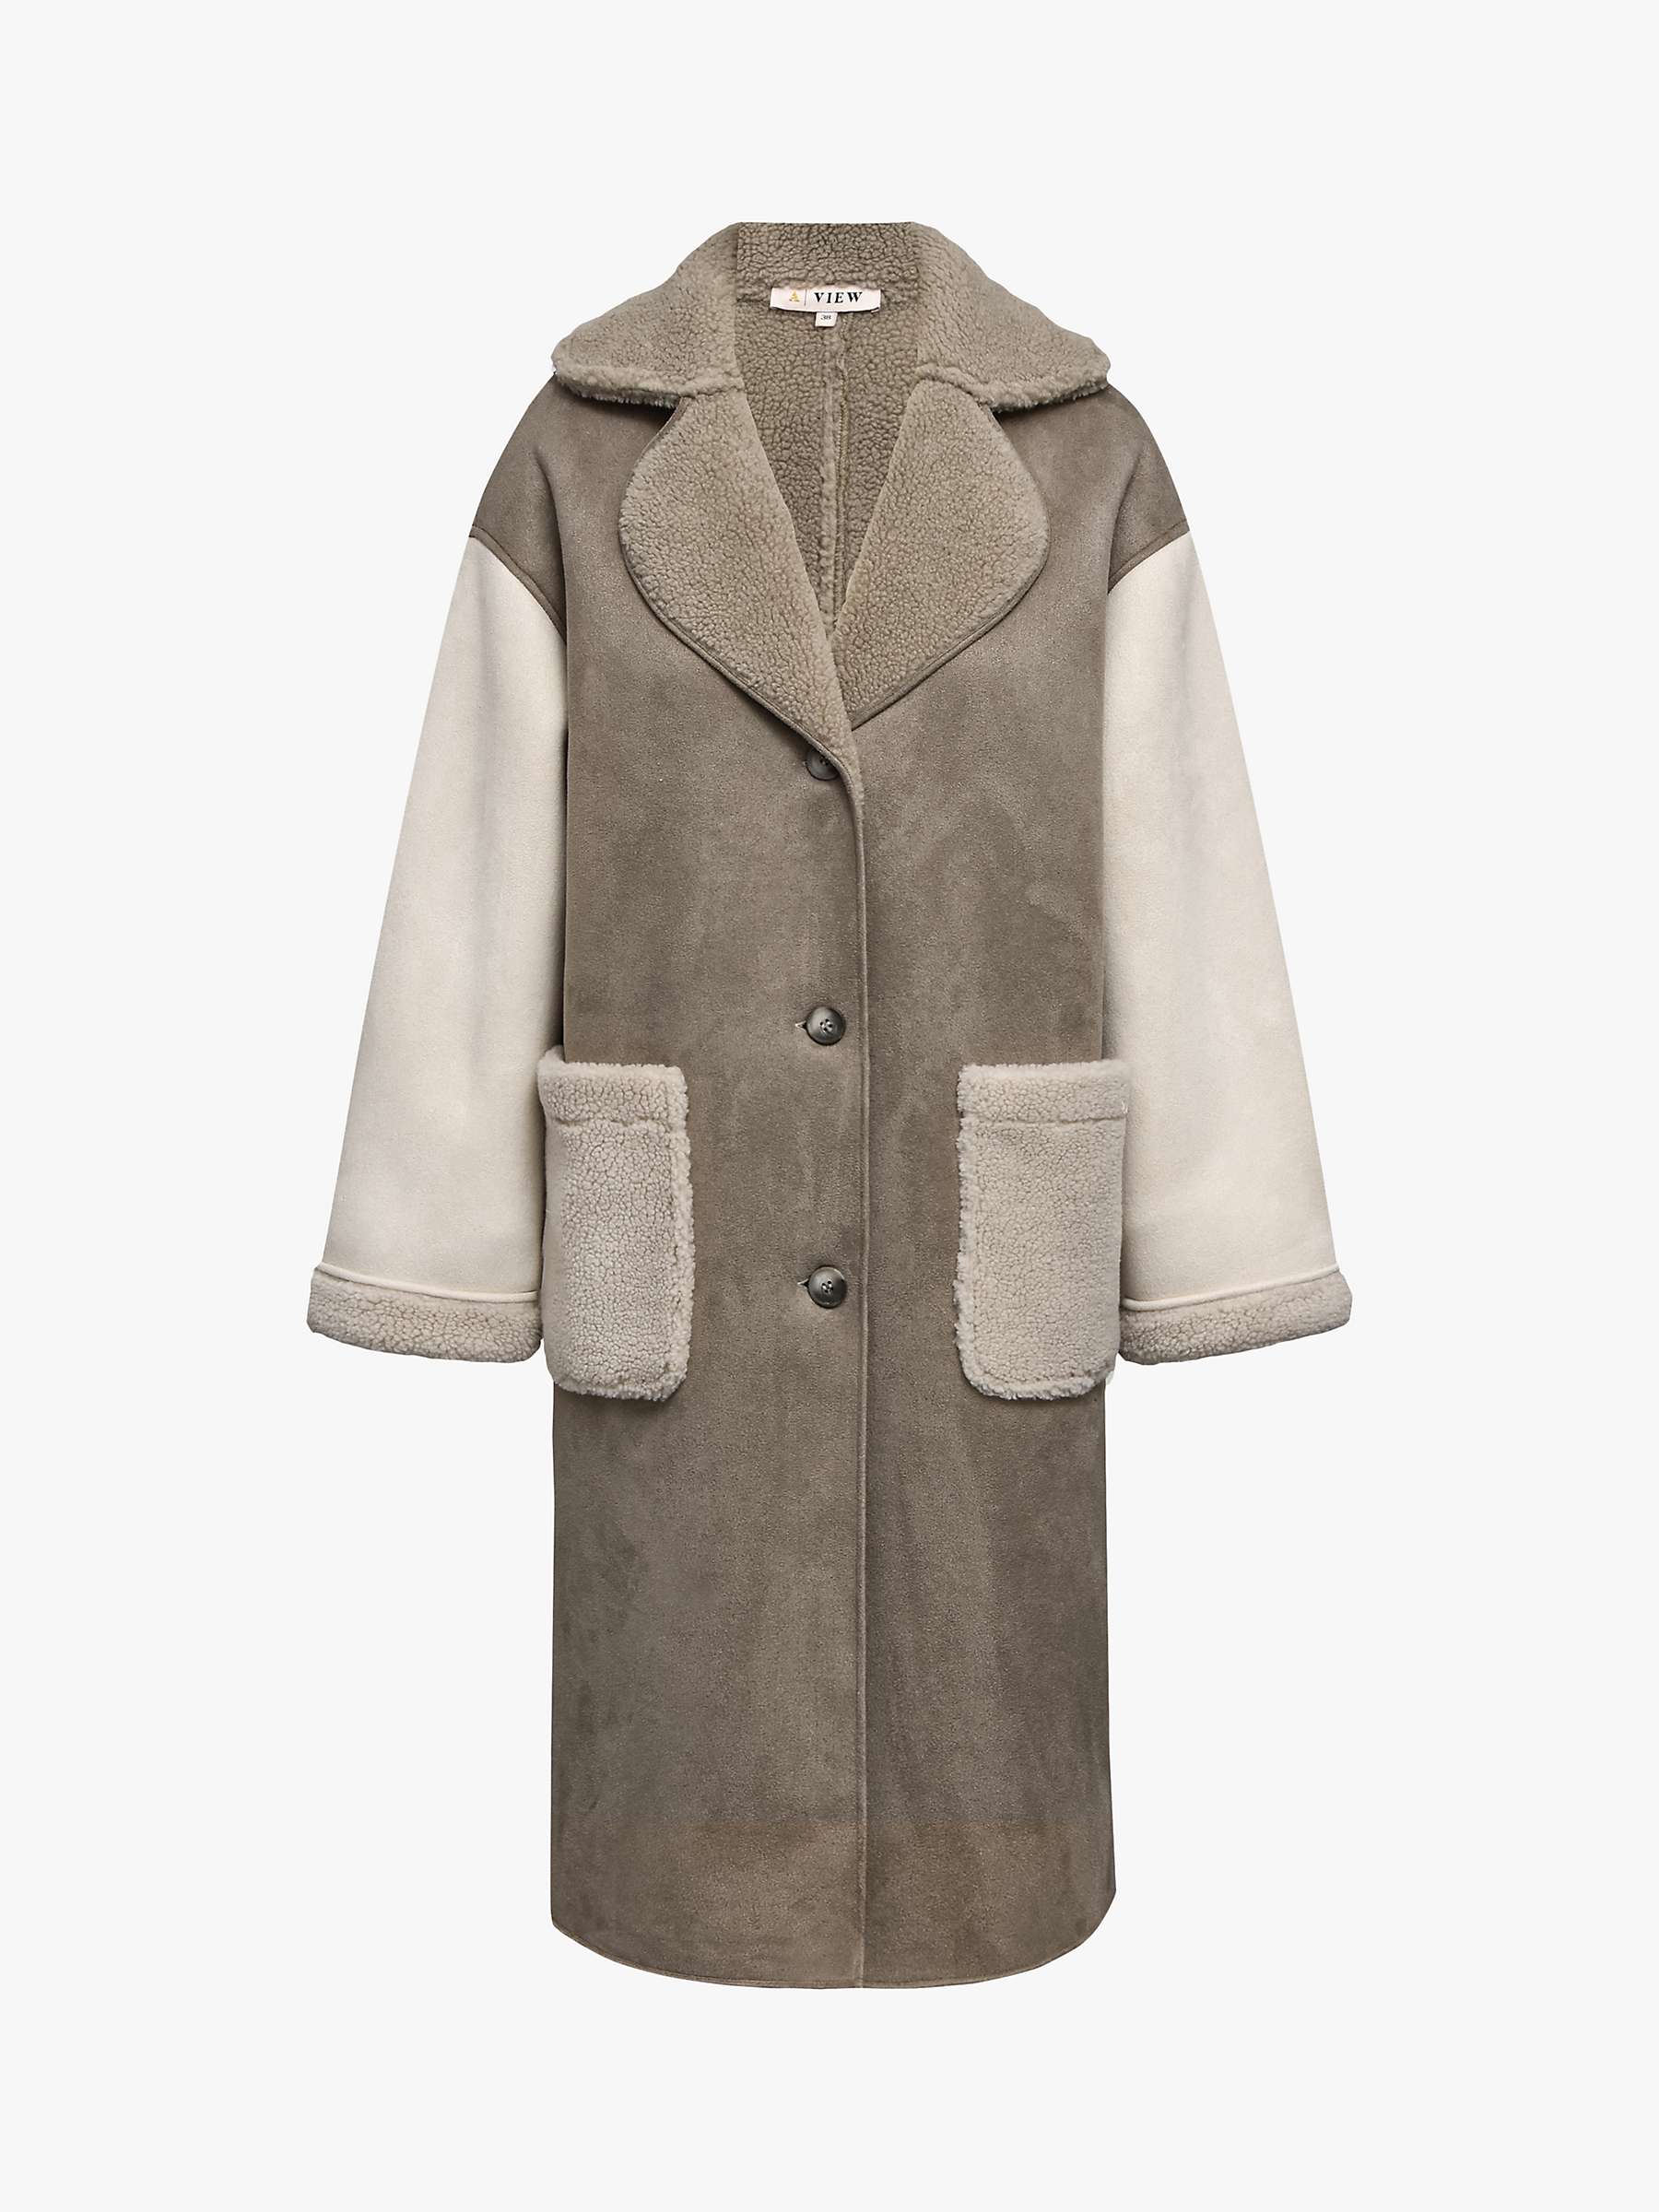 Buy A-VIEW Uria Teddy Oversized Coat Online at johnlewis.com